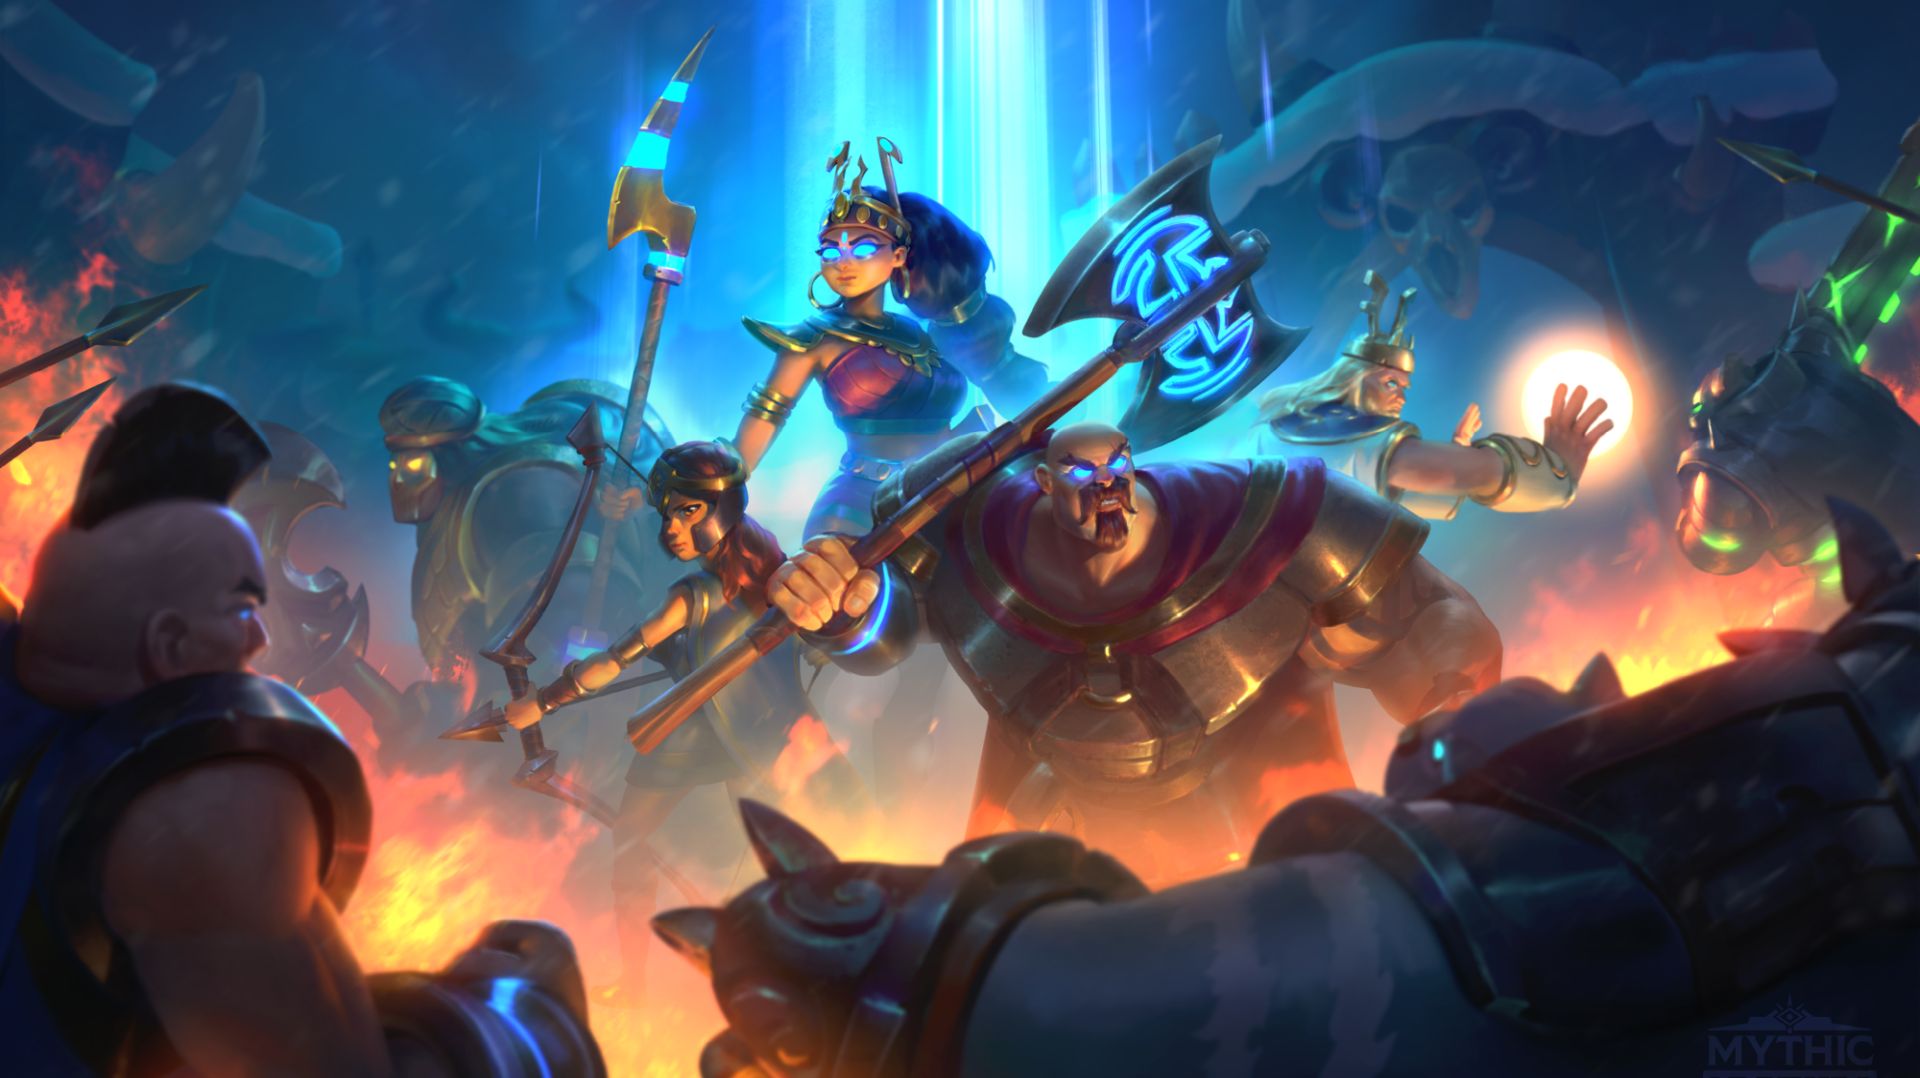 RPG strategy meets MOBA with Mythic Legends’ epic multiplayer gameplay